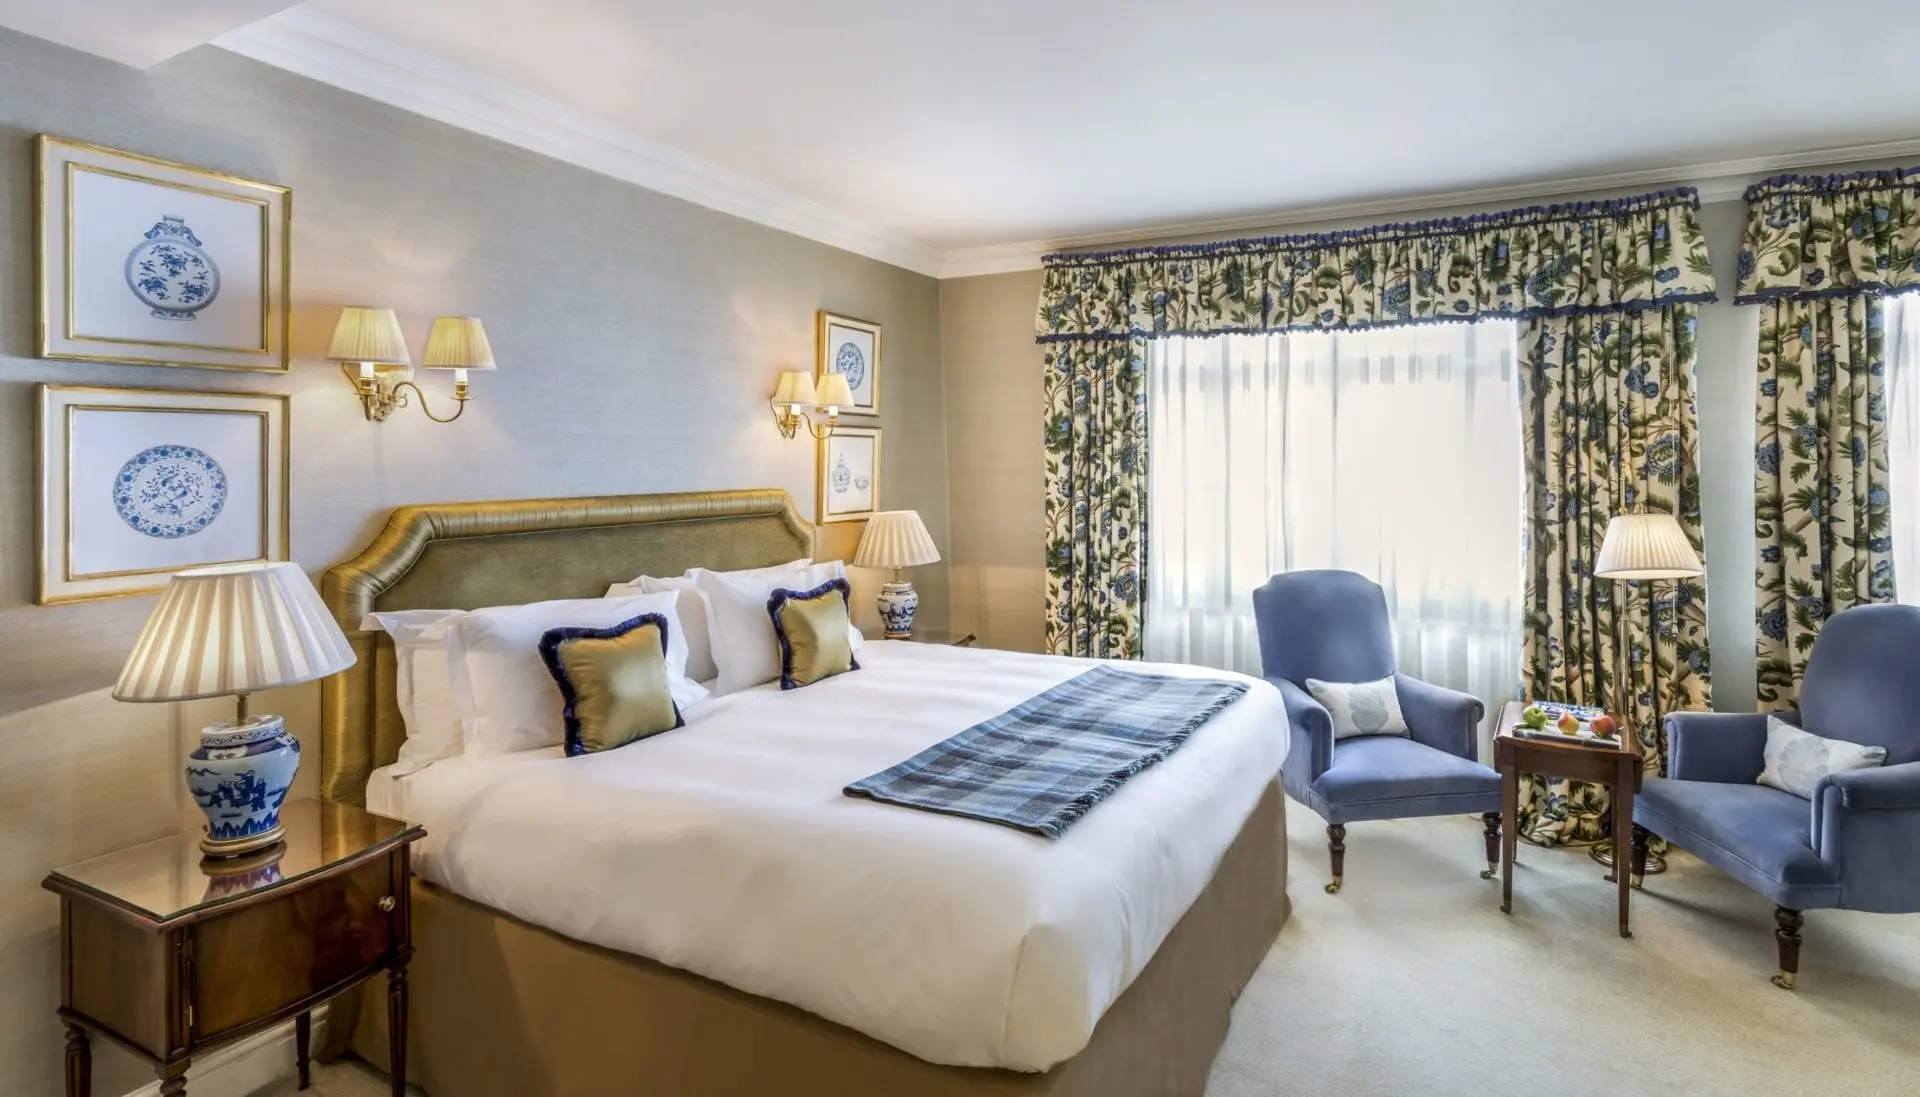 Hotel review Accommodation' - The Stafford London - 0